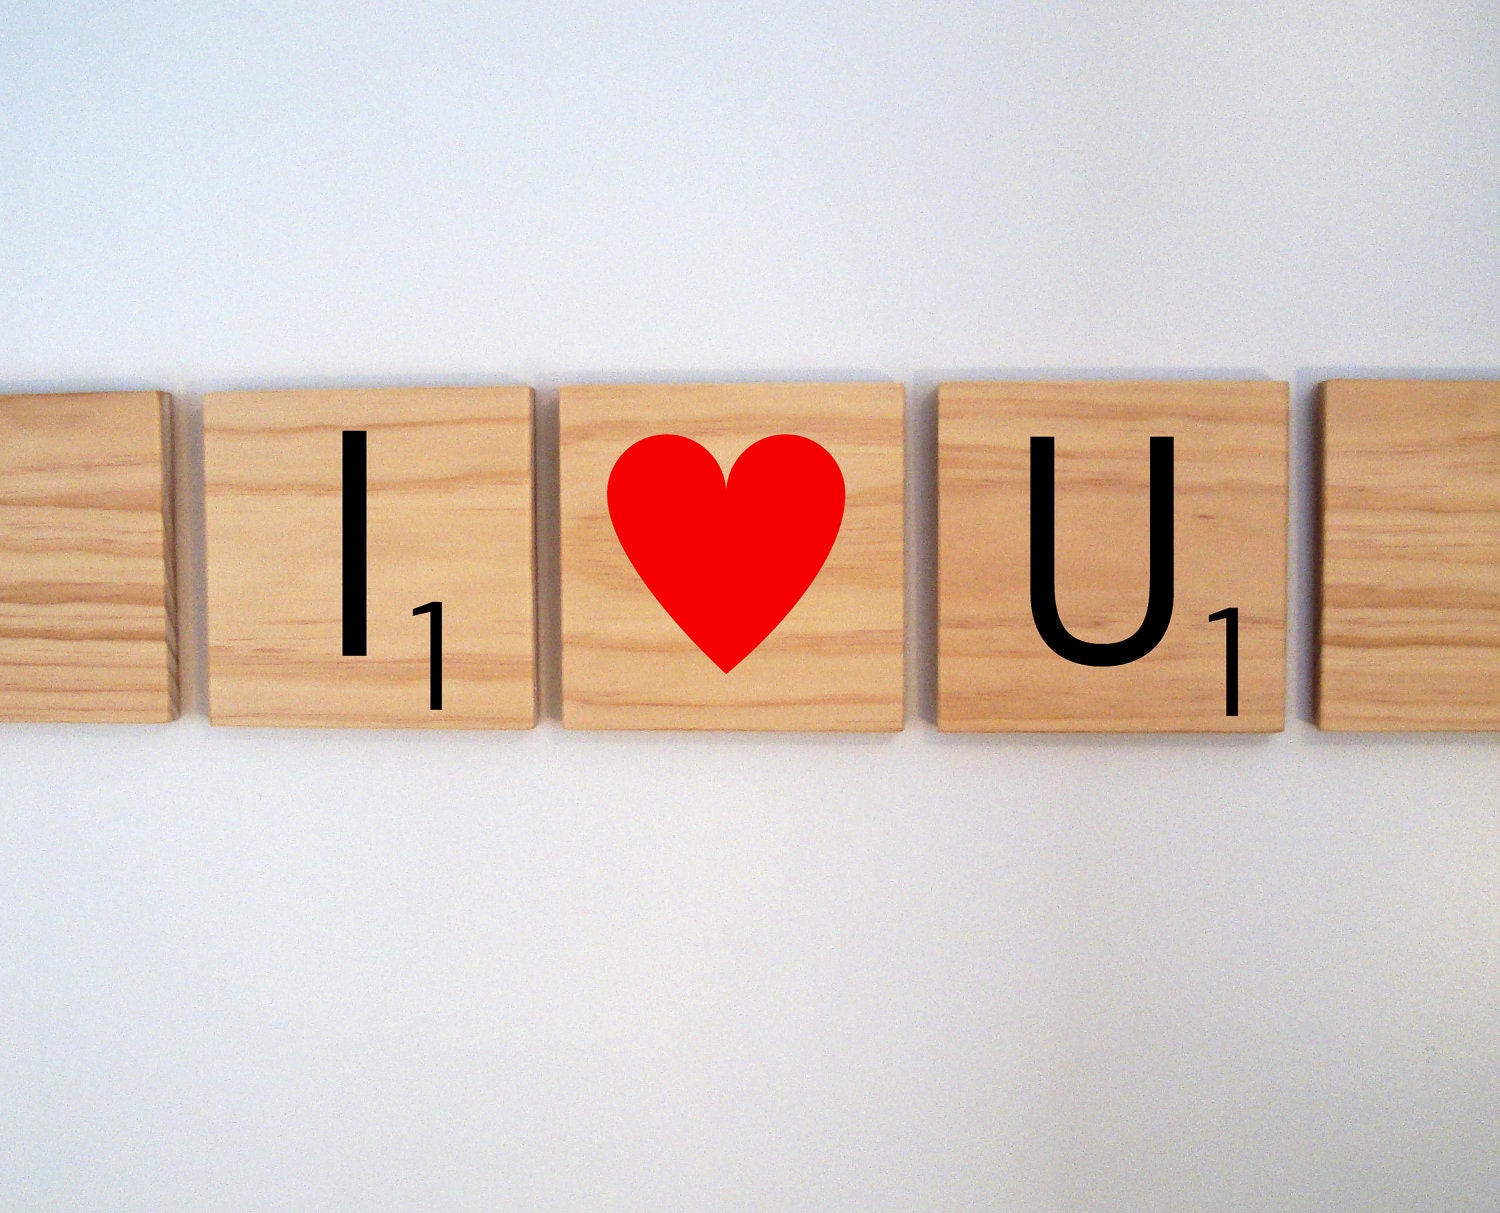 Scrabble Wall Art I heart U with red heart - 3 tiles - 15tangerines